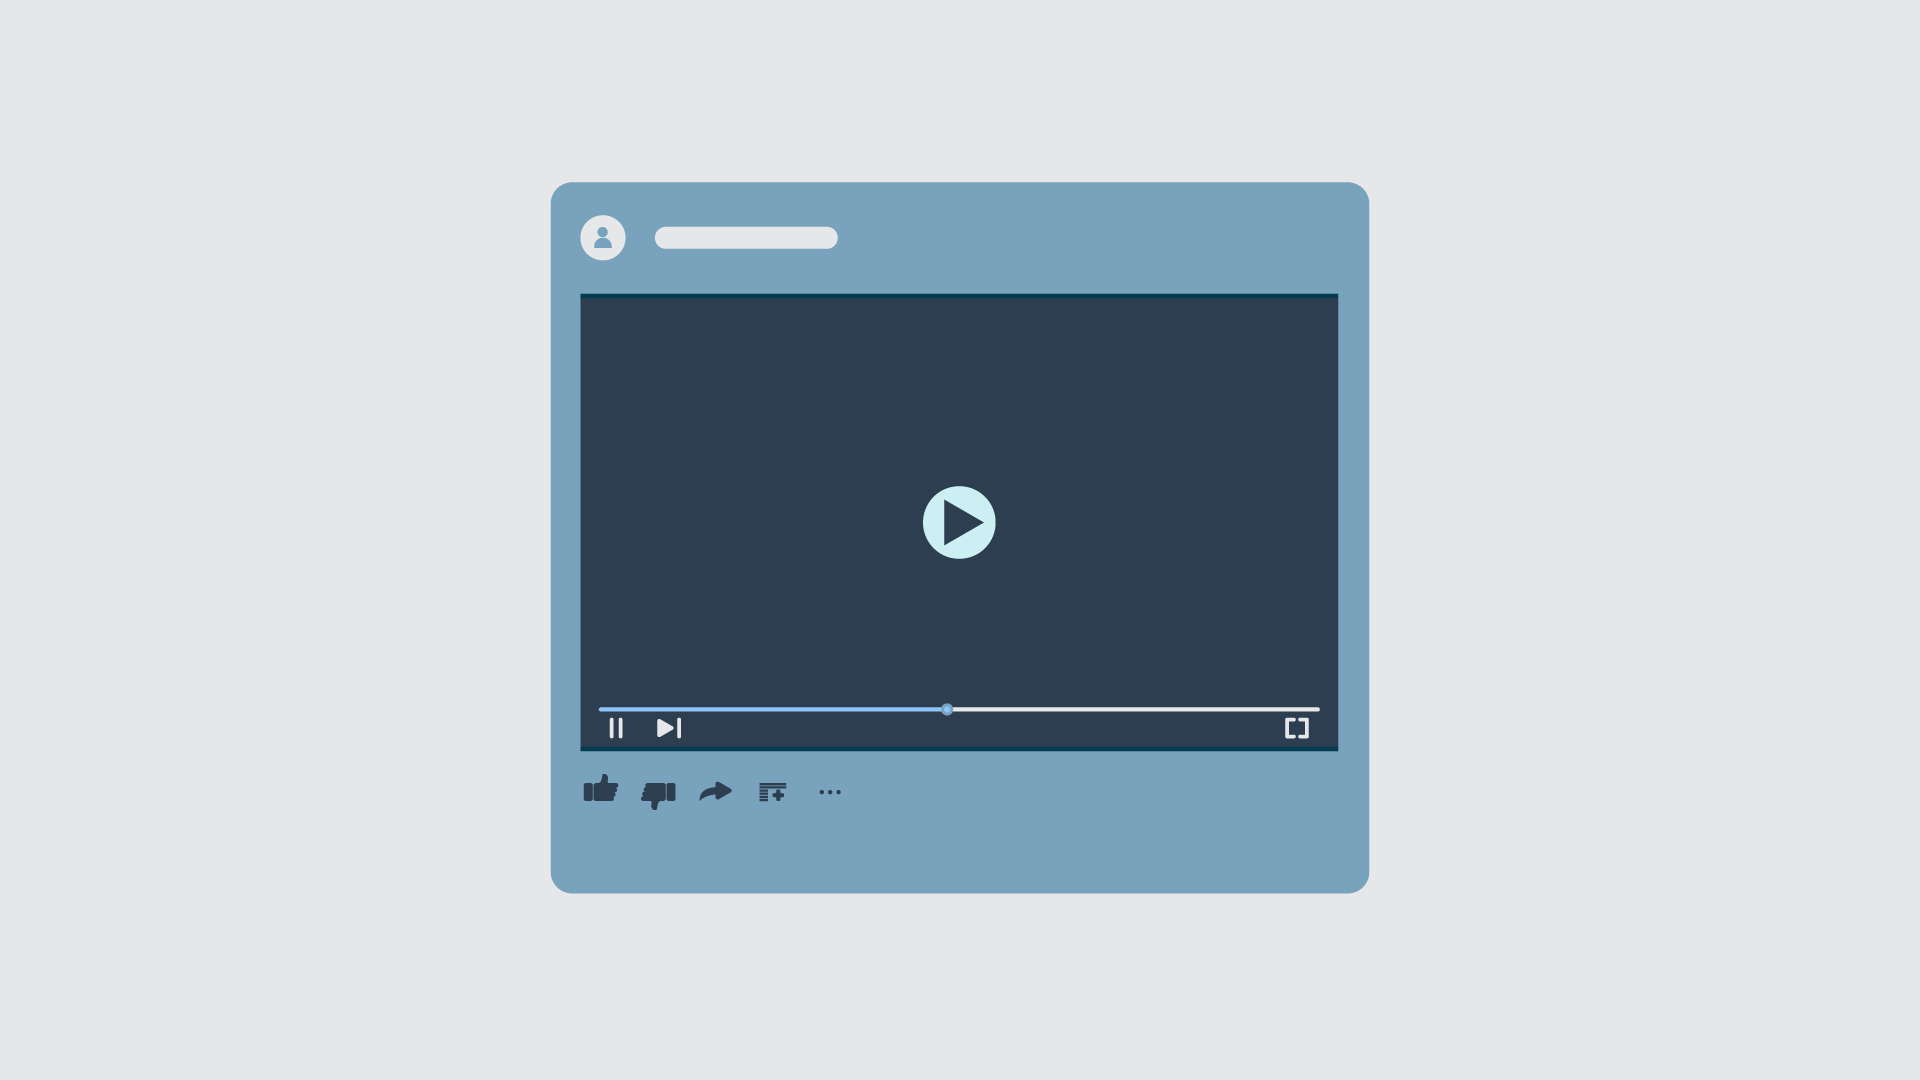 What is Video Marketing